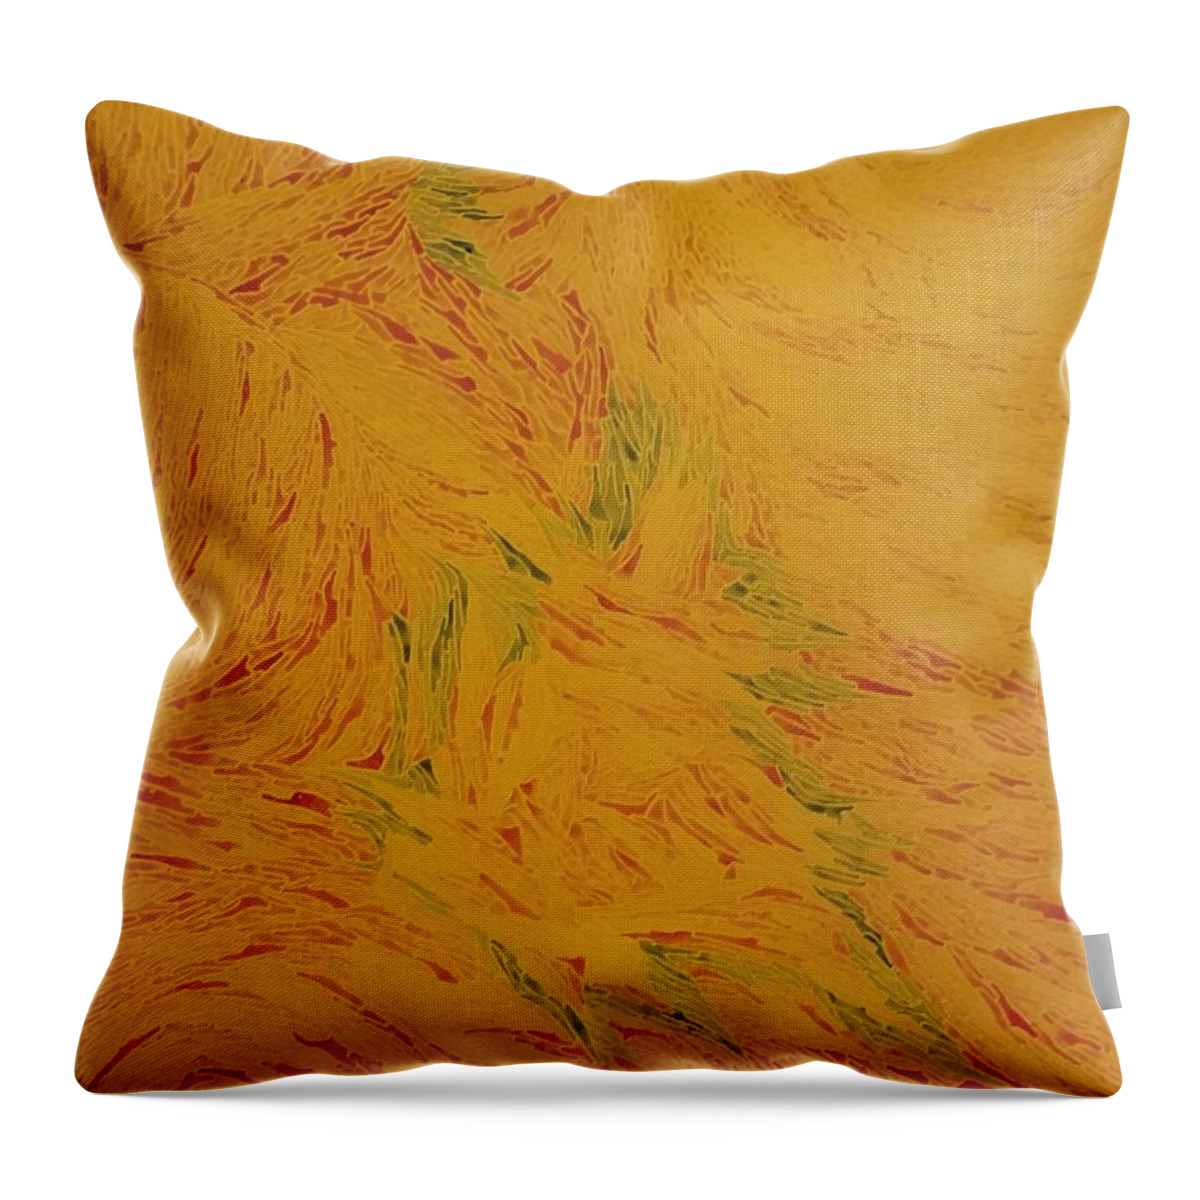 Ocean Throw Pillow featuring the painting Sunny Ocean View by Darren Whitson